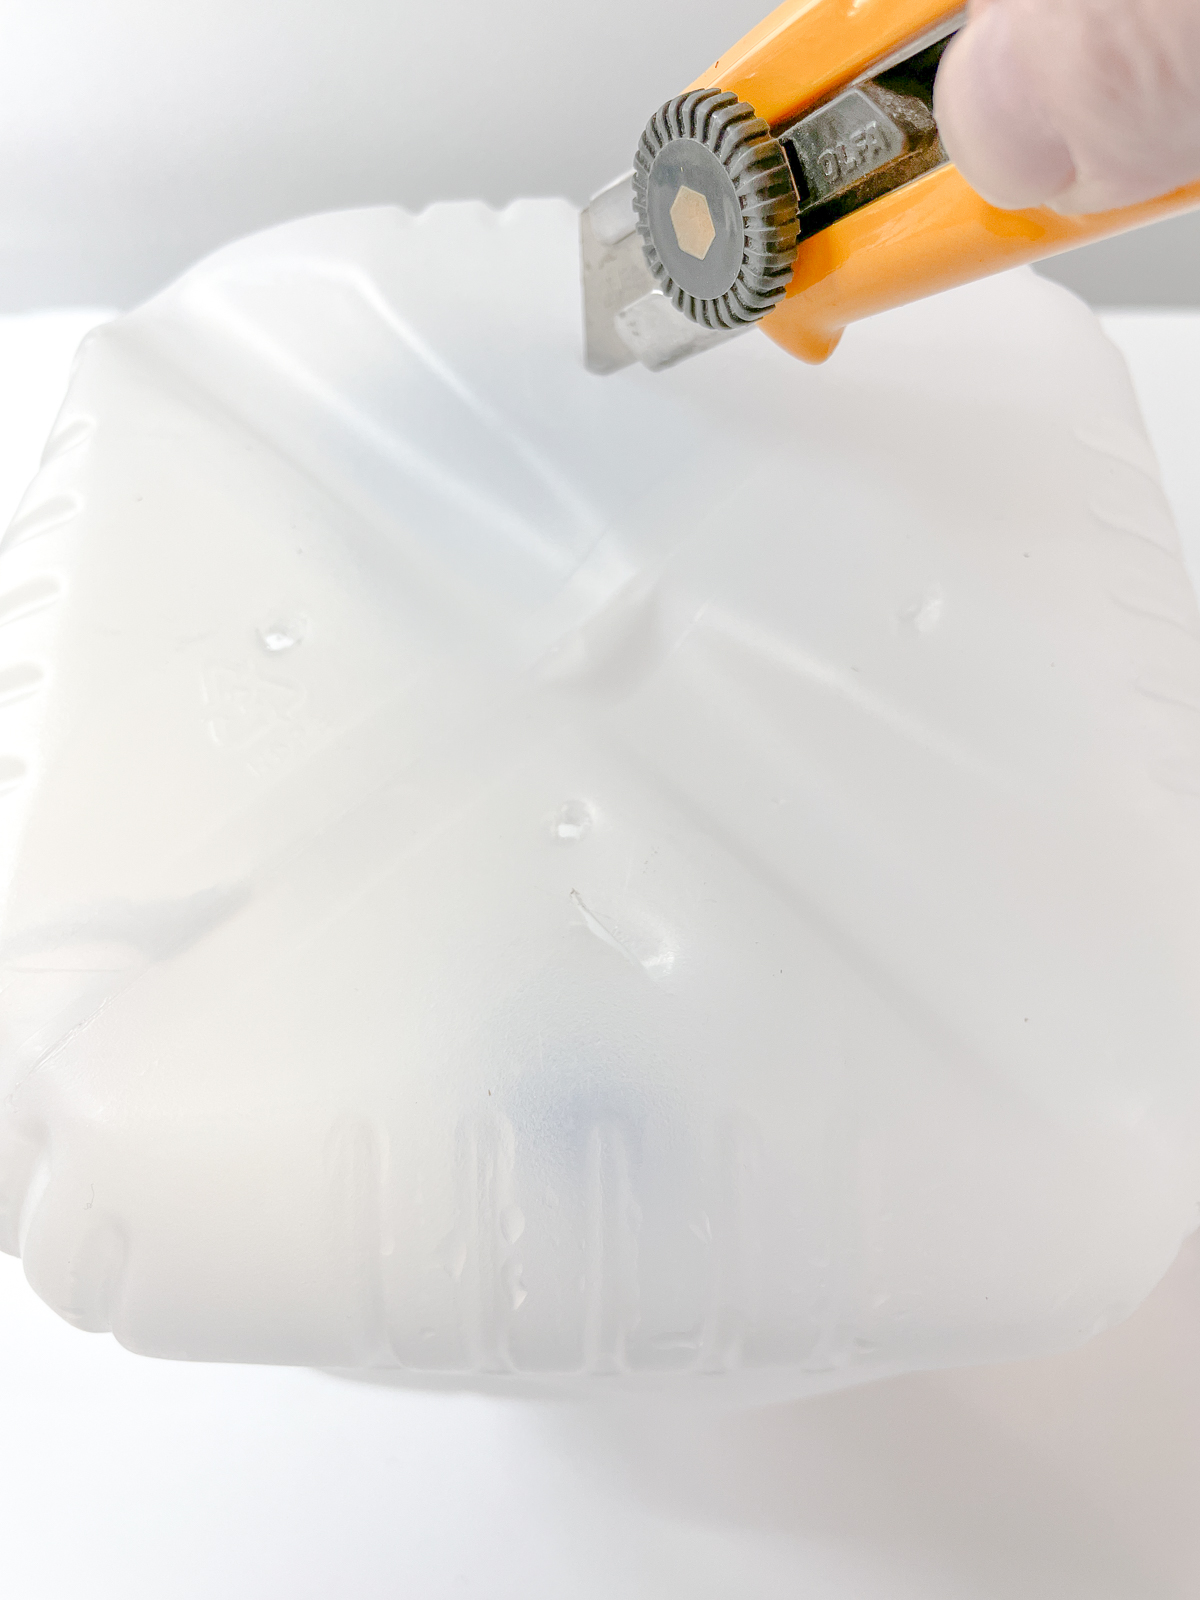 poking drainage holes in the bottom of a plastic milk jug with a box cutter